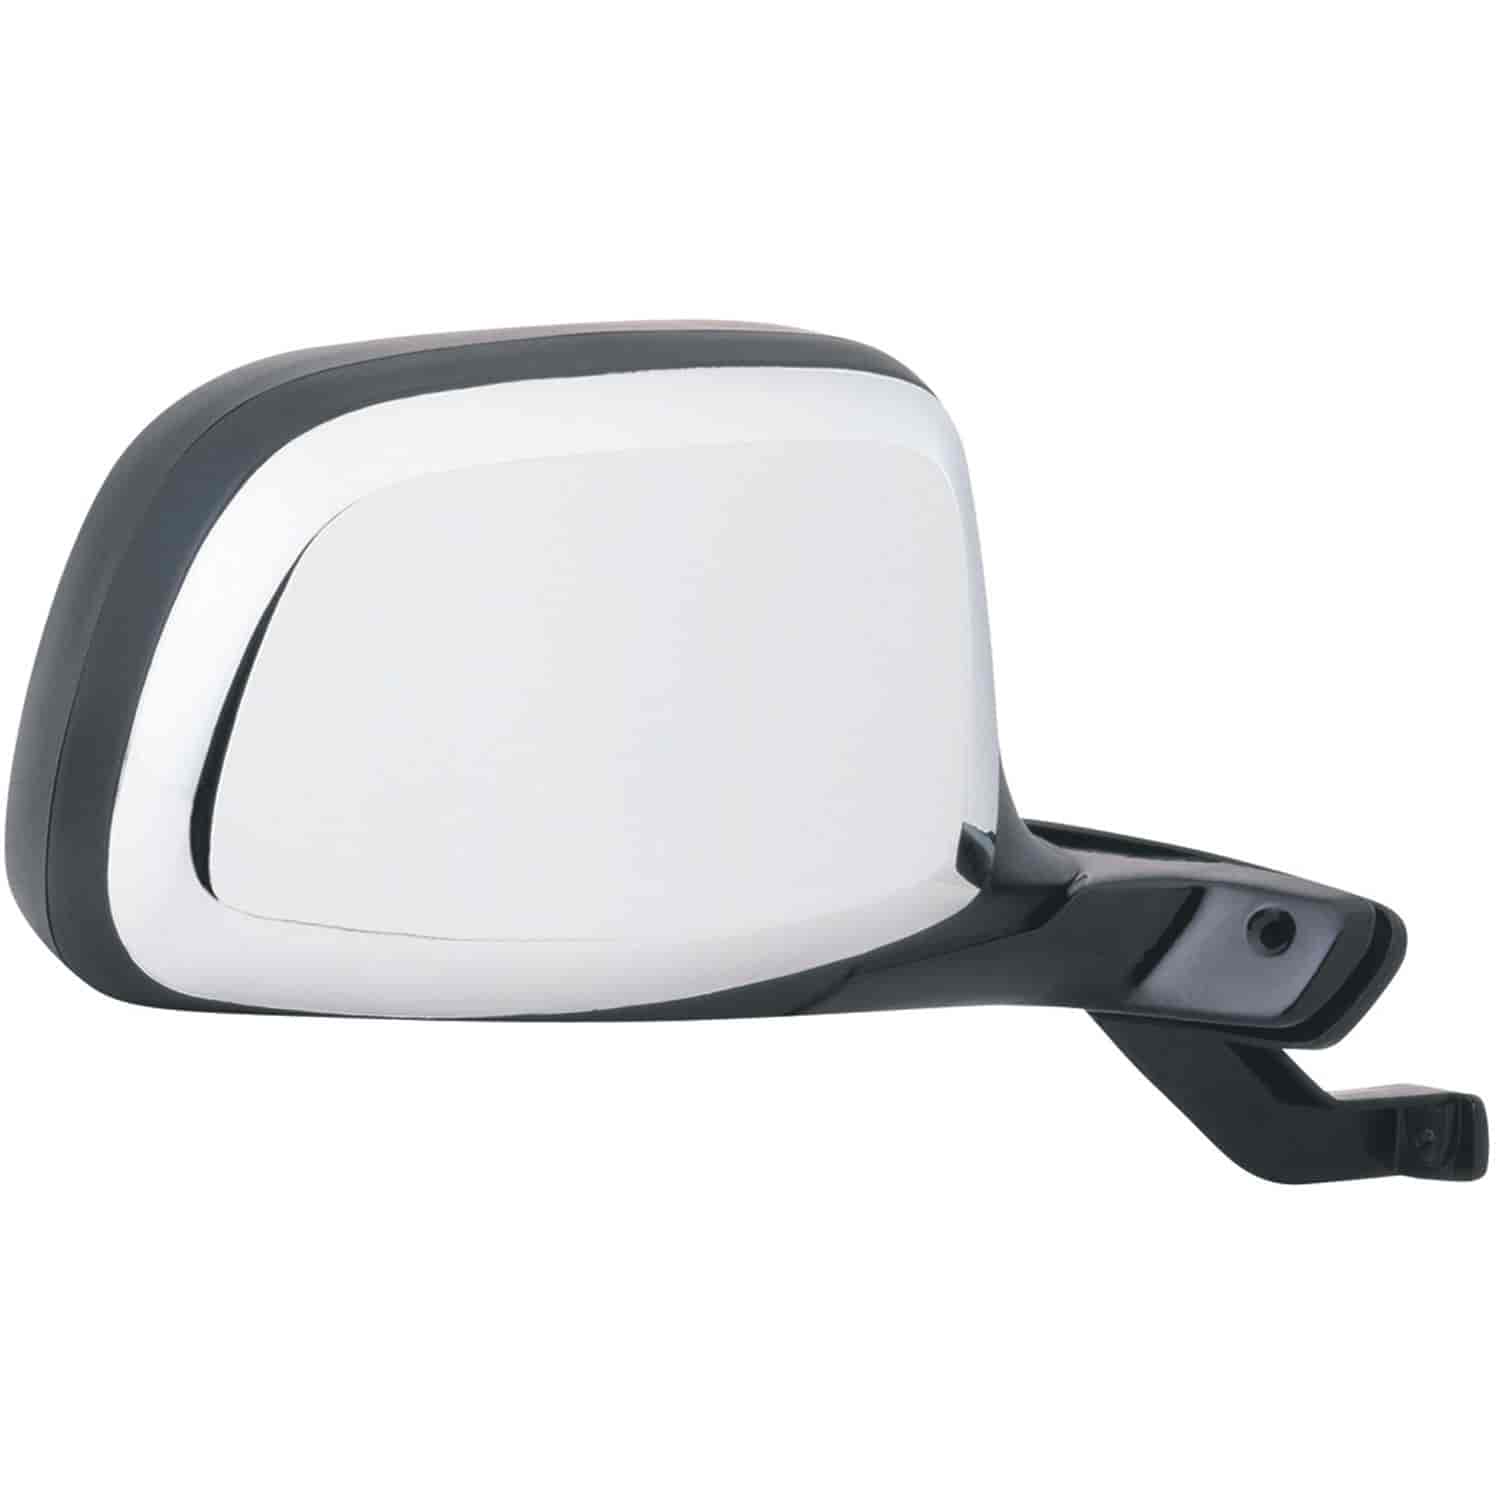 OEM Style Replacement mirror for 92-96 Bronco F150 F250 97 F250 HD 92-97 F350 paddle design passenge